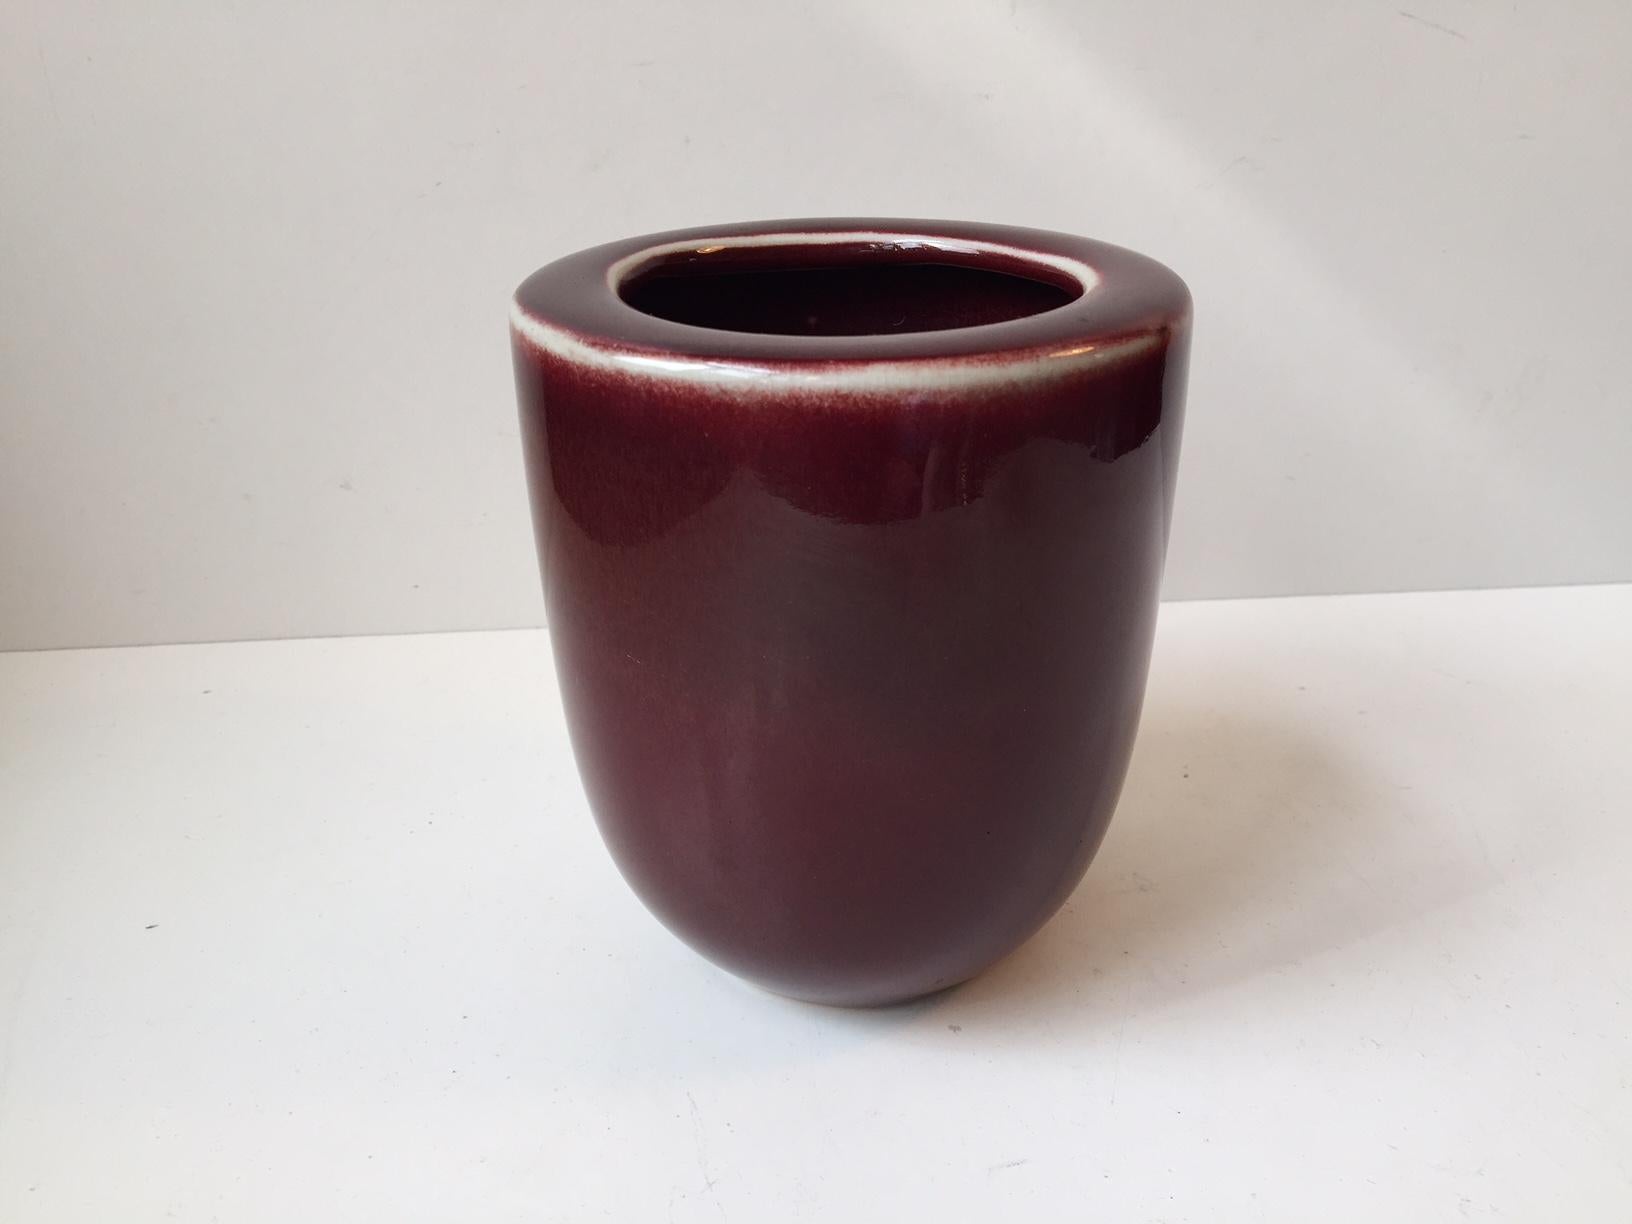 This vase in the style of Nils Thorsson and Daniel Andersen is made of ceramic glazed in oxblood red, highlighted by white edges.